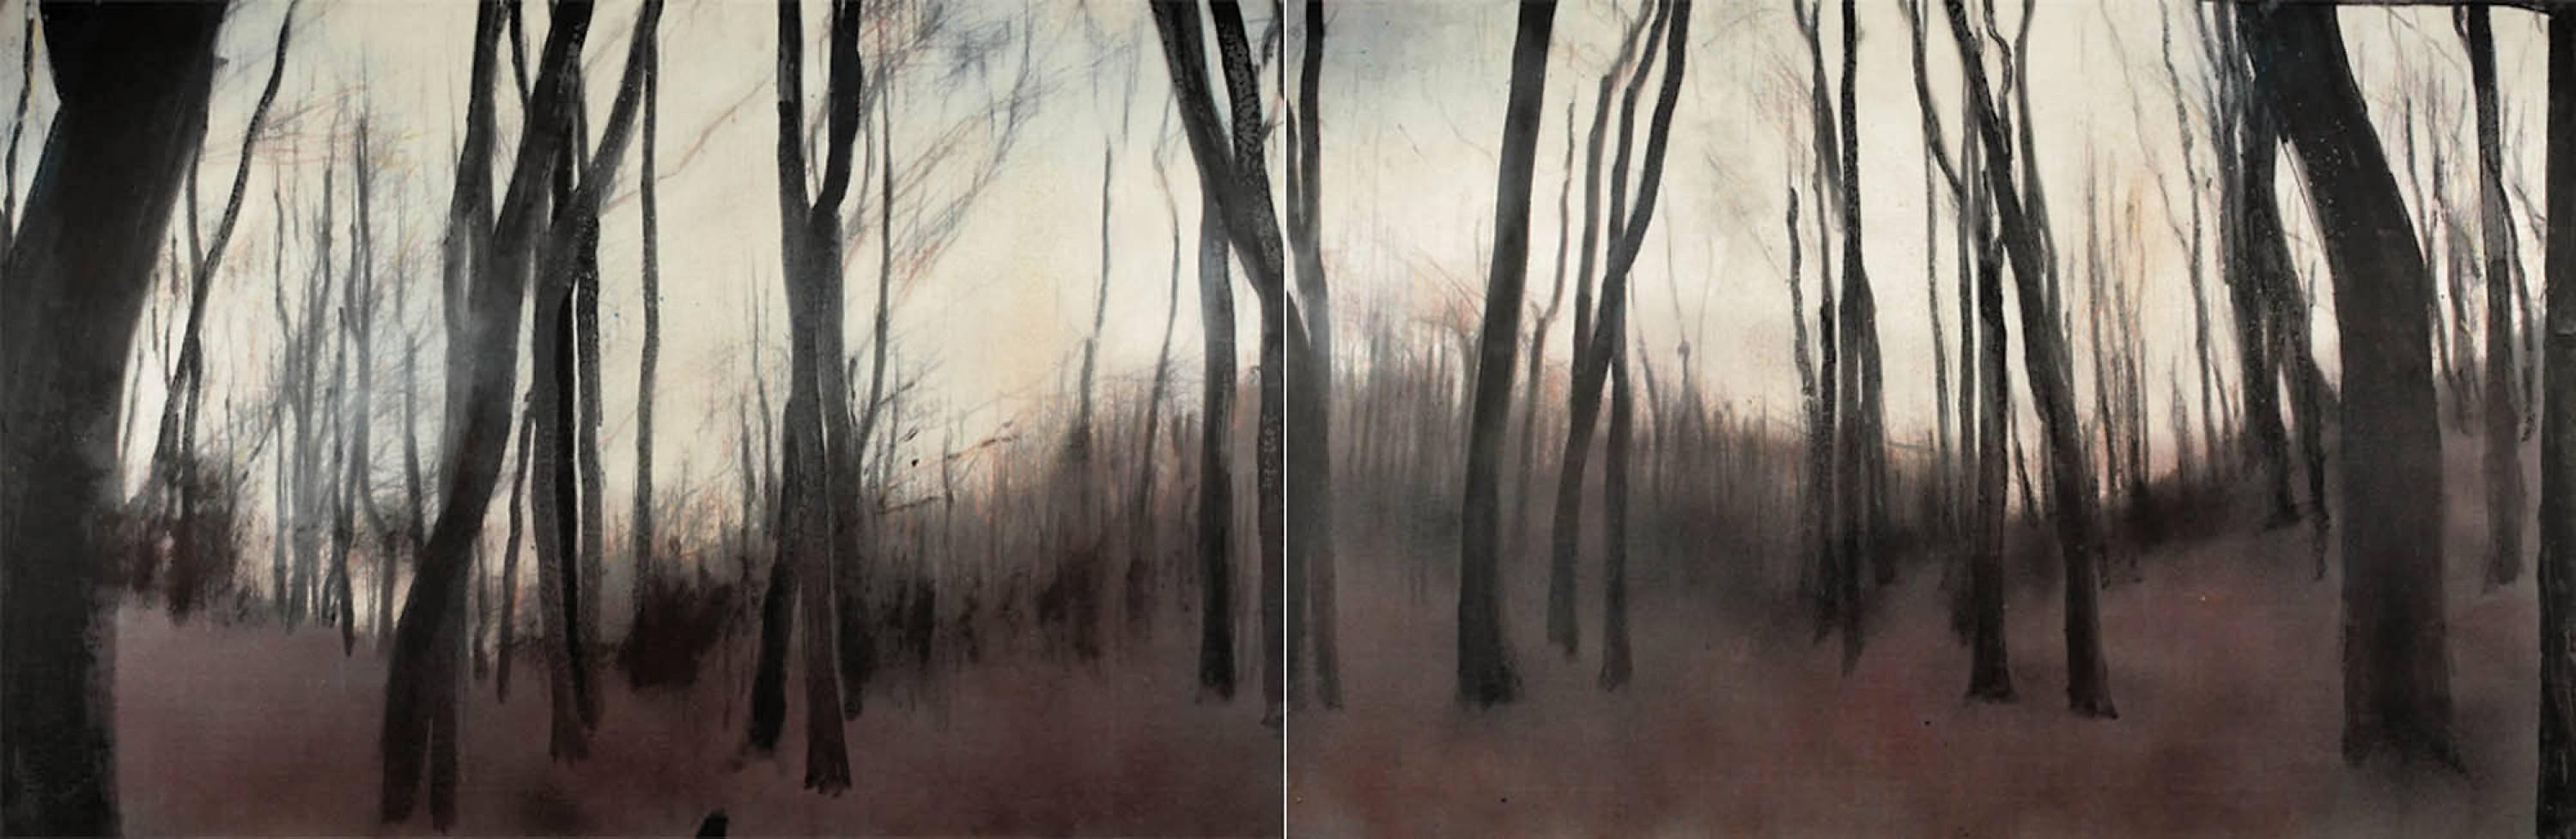 Ioan Sbârciu Landscape Painting - Cider forest V (diptych) - Contemporary, Landscape, Beige, Brown, Trees, Nature